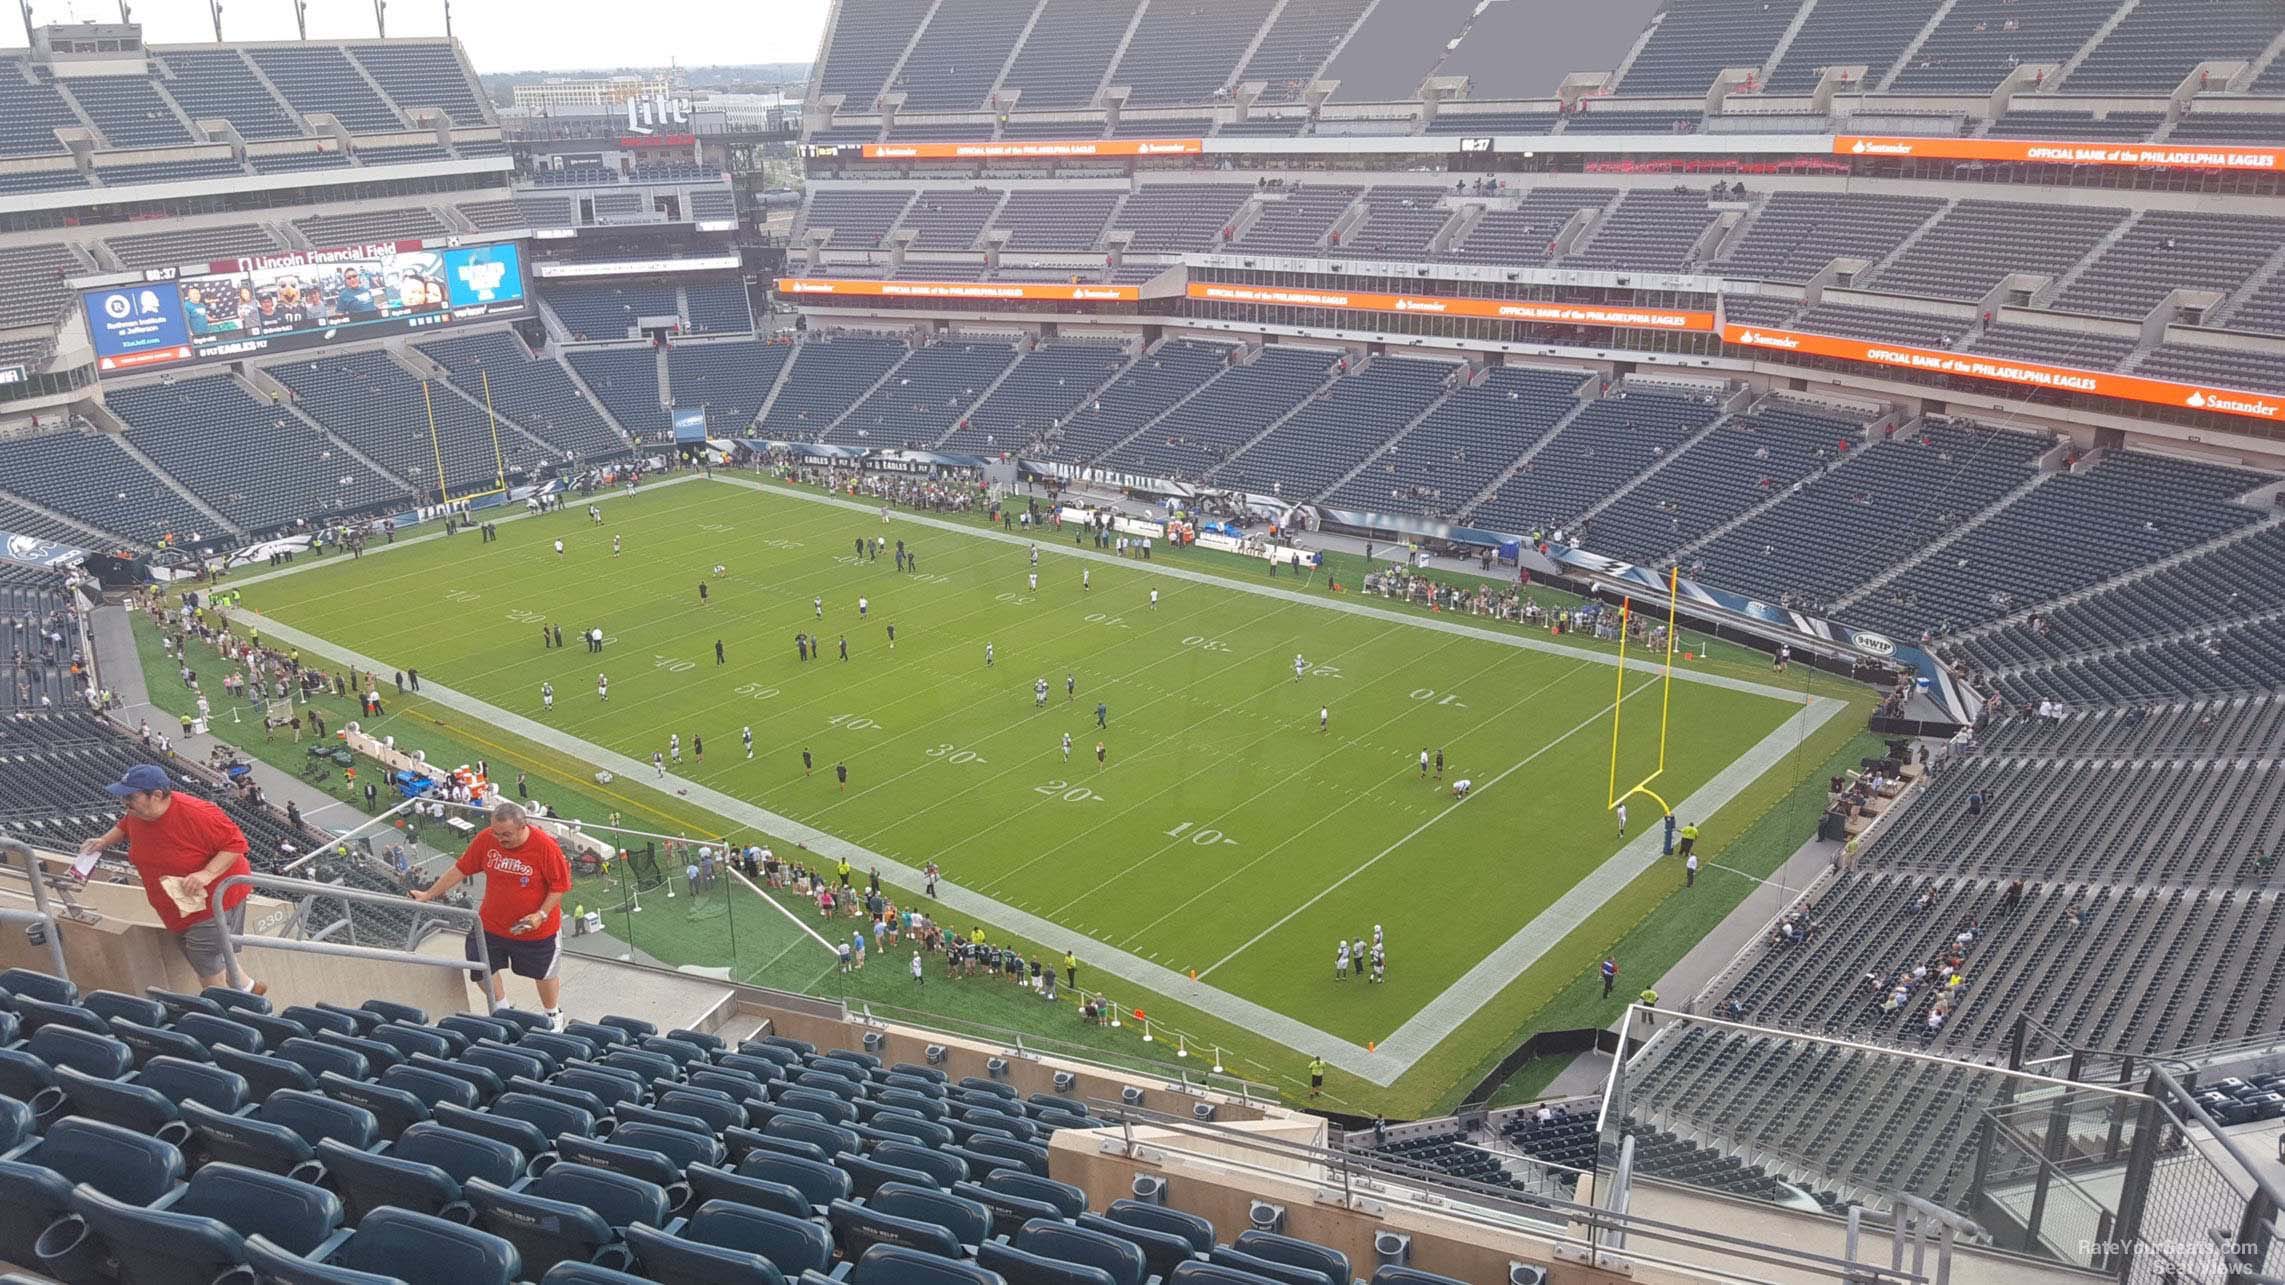 section 231, row 15 seat view  for football - lincoln financial field